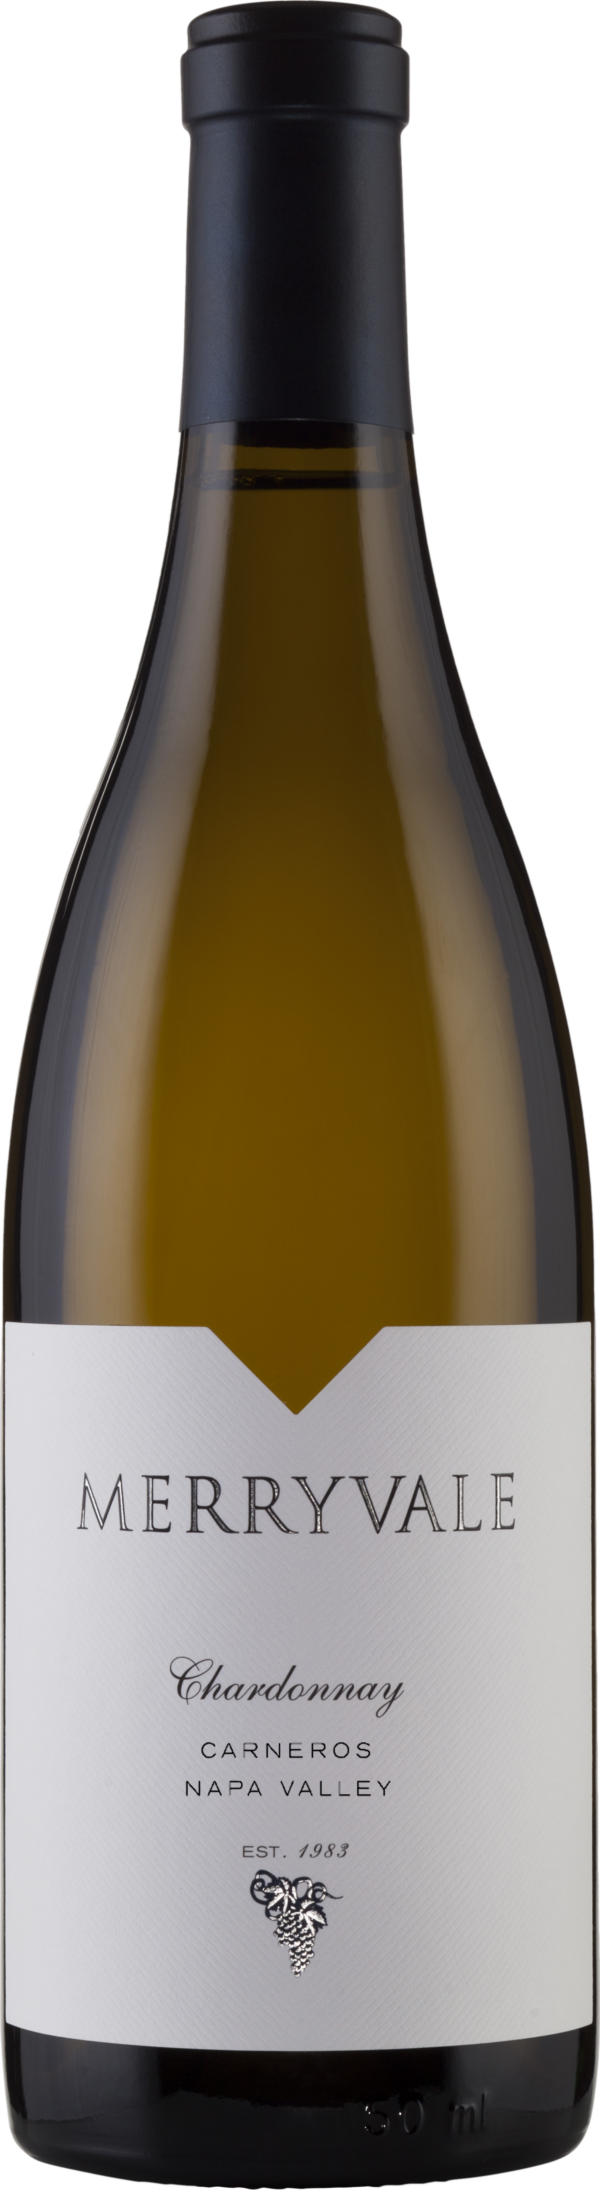 Product image of Merryvale Chardonnay Carneros 2019 from 8wines